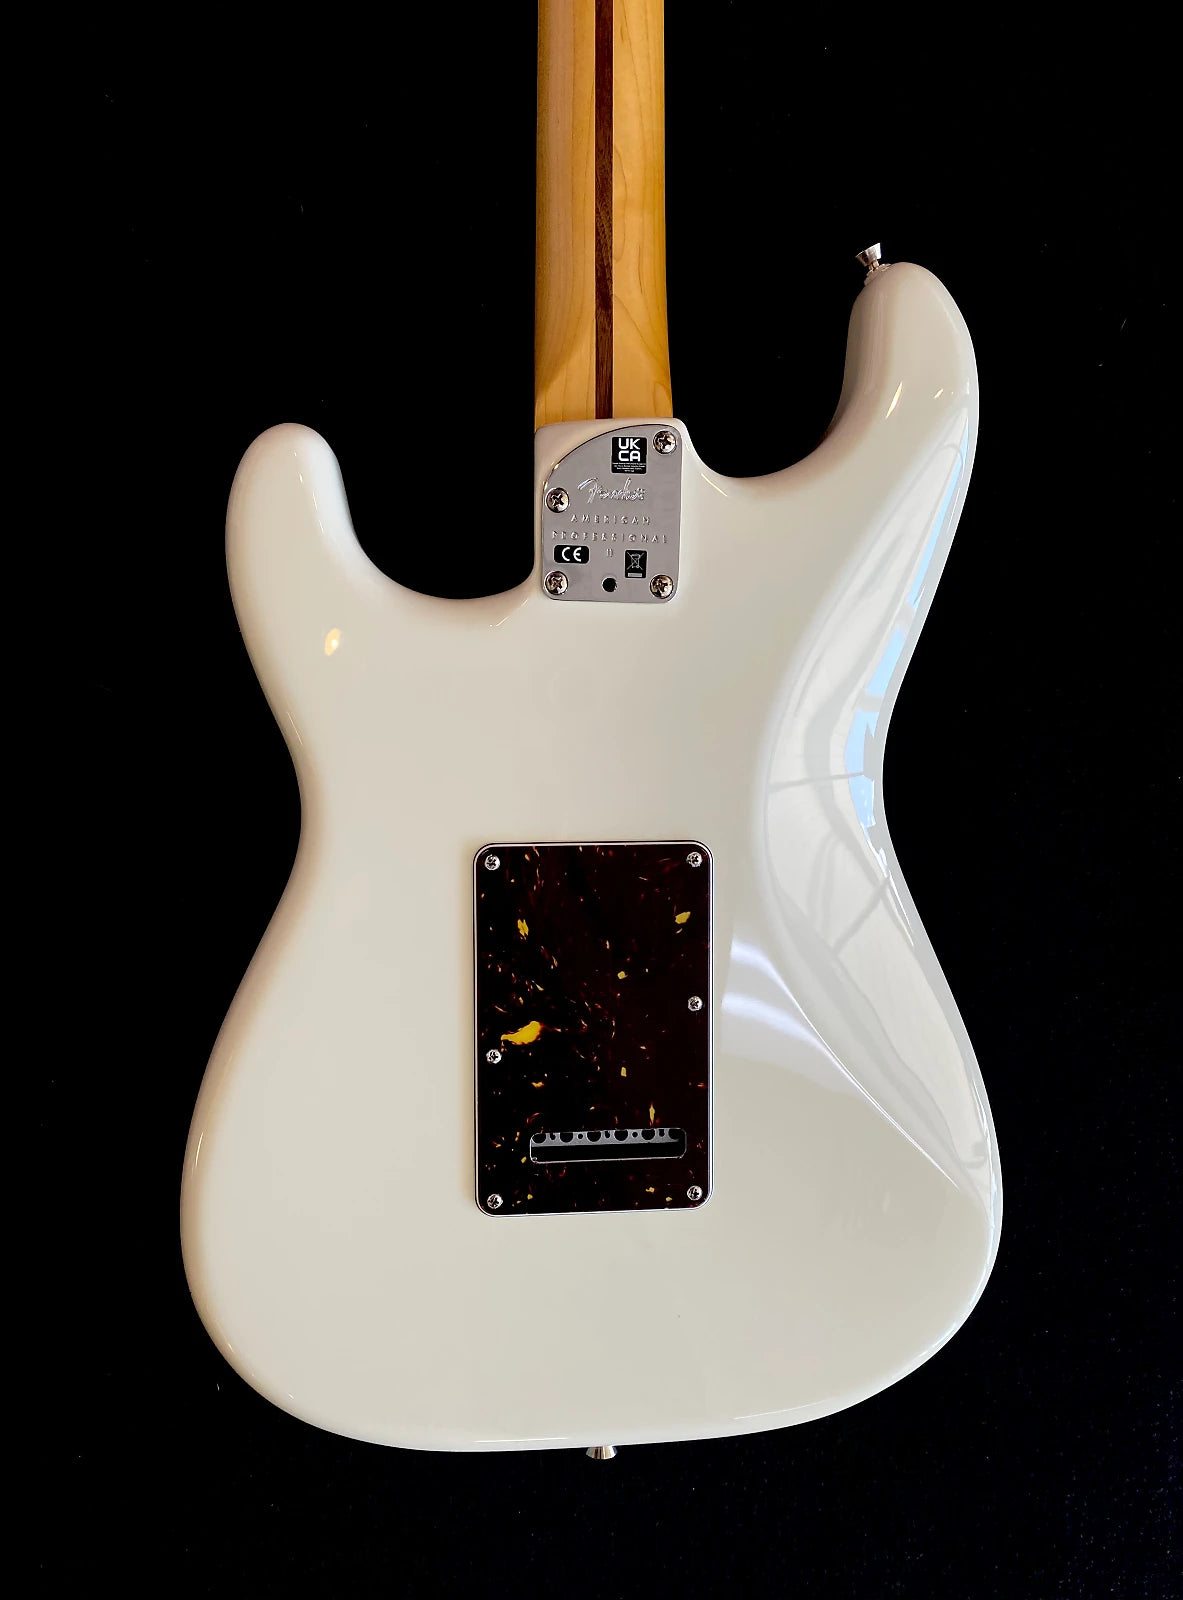 Fender American Professional II Stratocaster HSS Olympic White